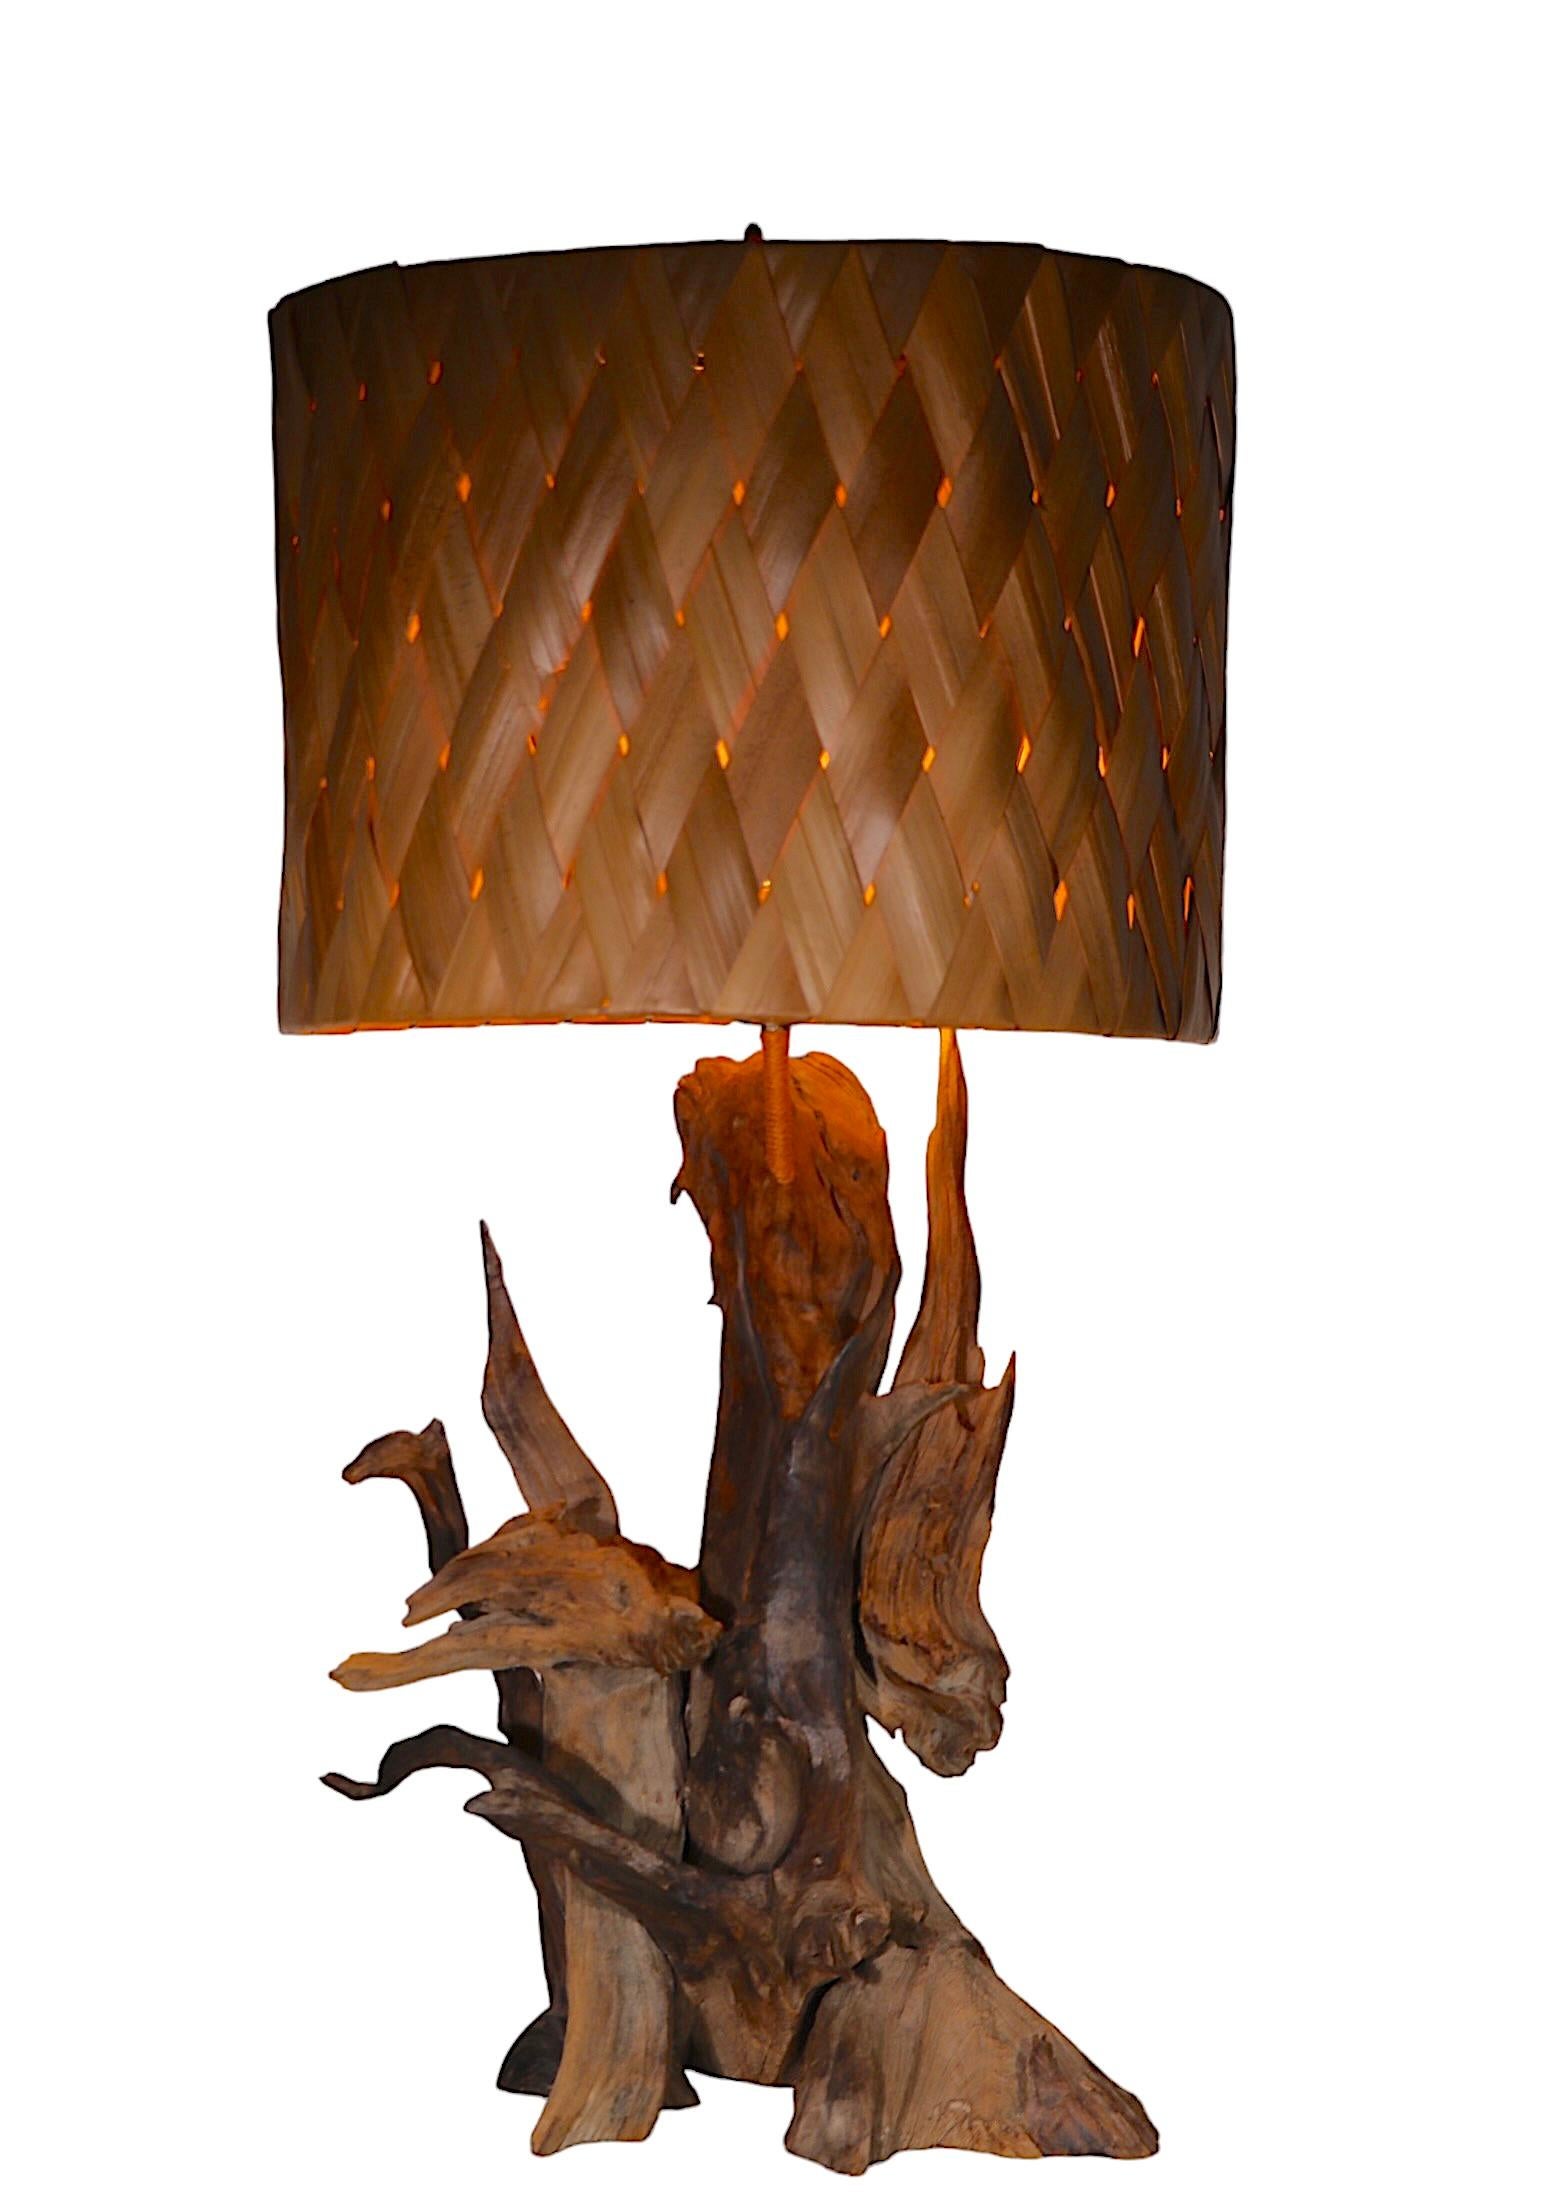 20th Century Mid Century Driftwood Table Lamp with Original Woven Rush Shade c 1950/1970's For Sale